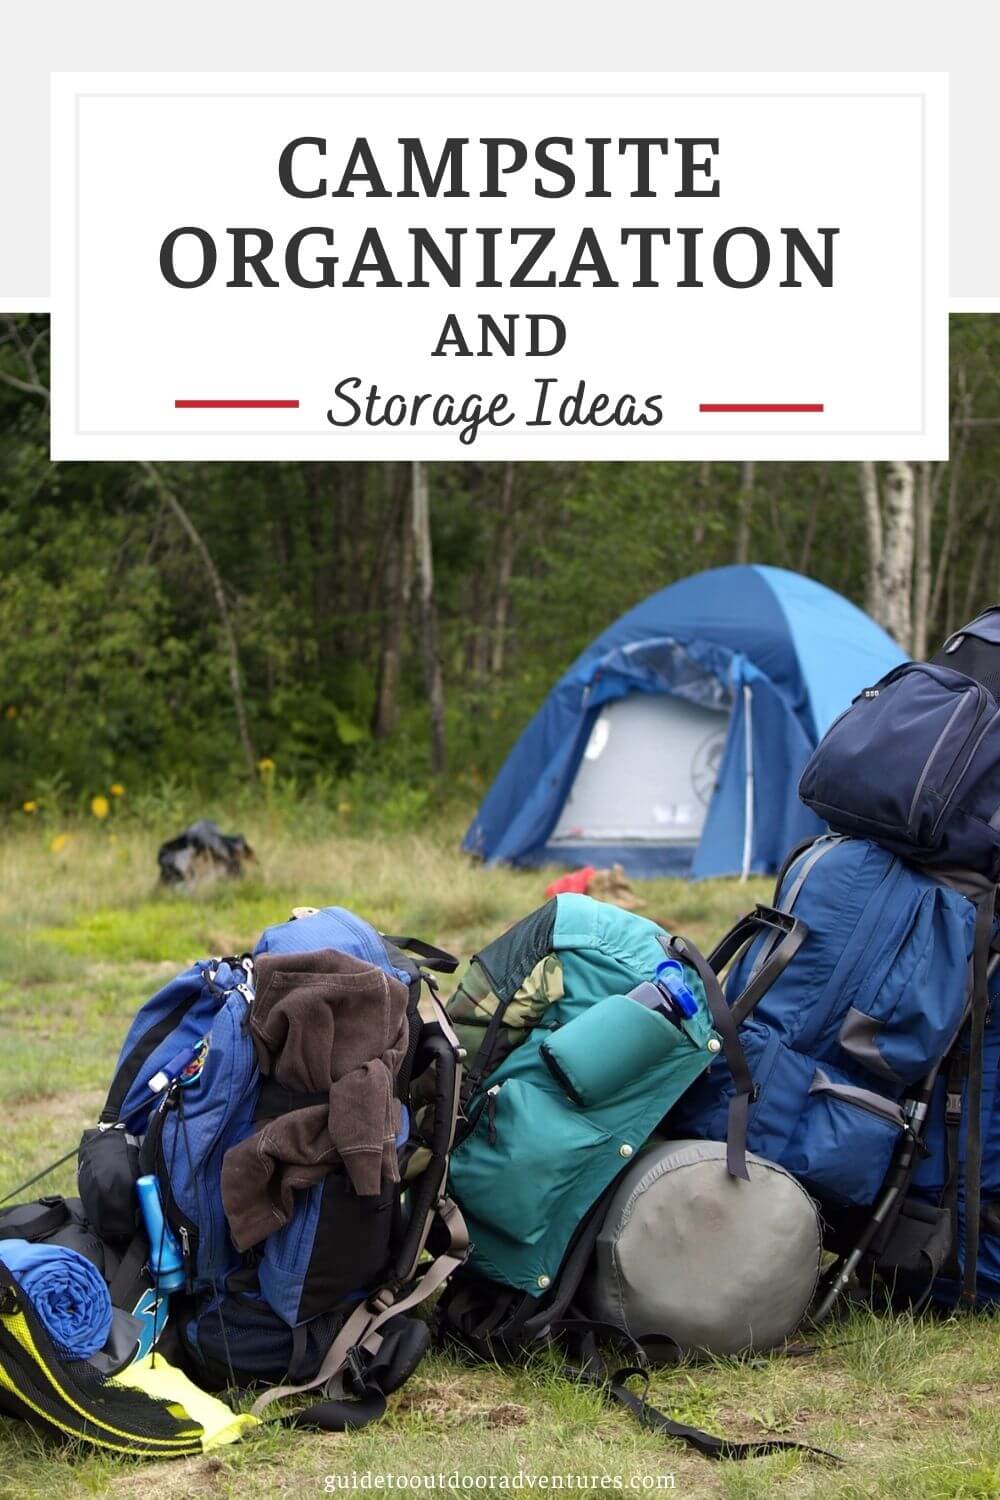 Campsite Organization and Storage Ideas - Guide To Outdoor Adventures